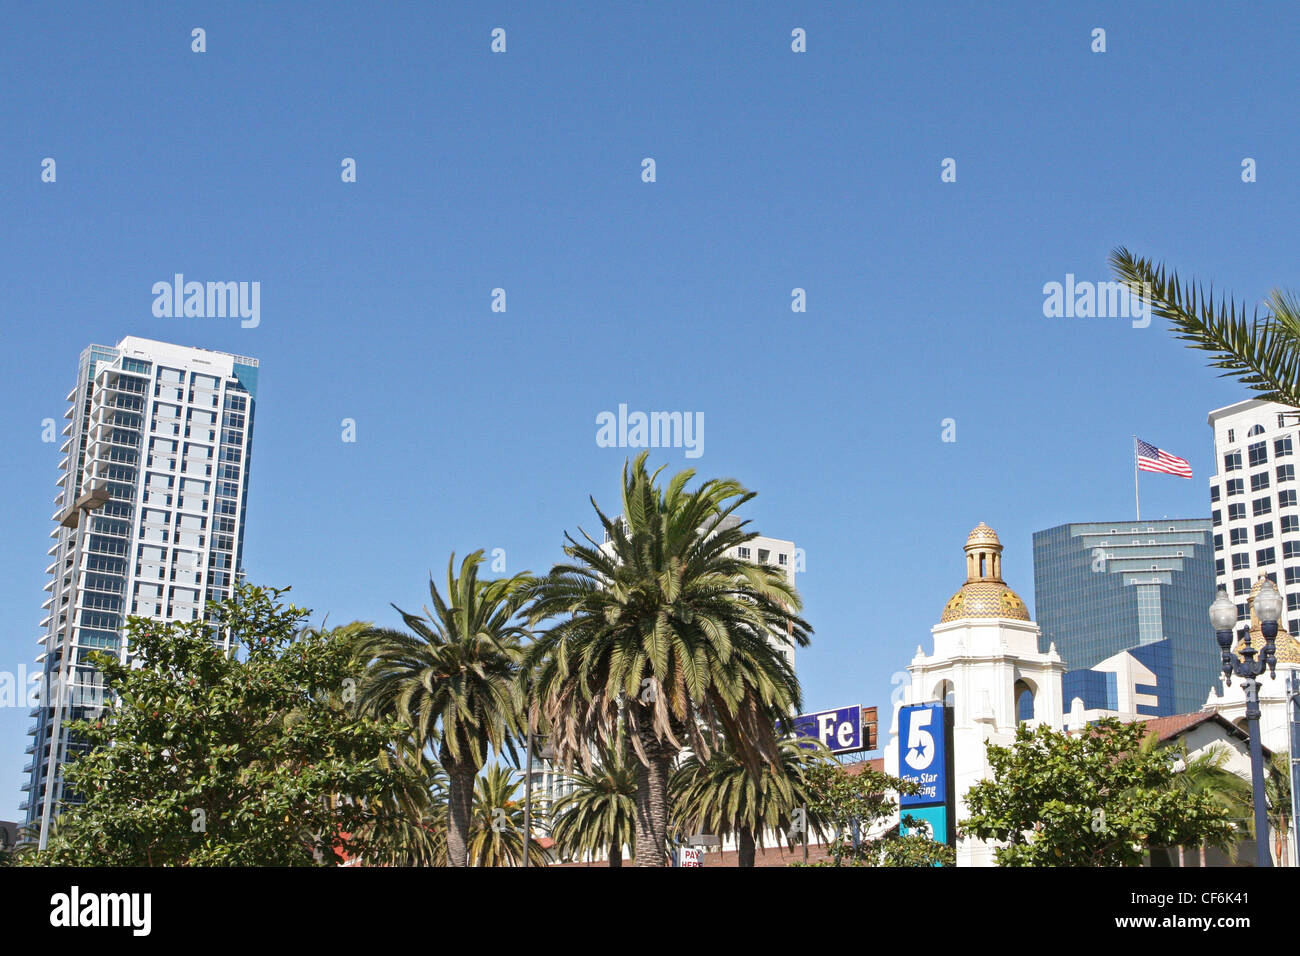 Images of San Diego, California, downtown Stock Photo